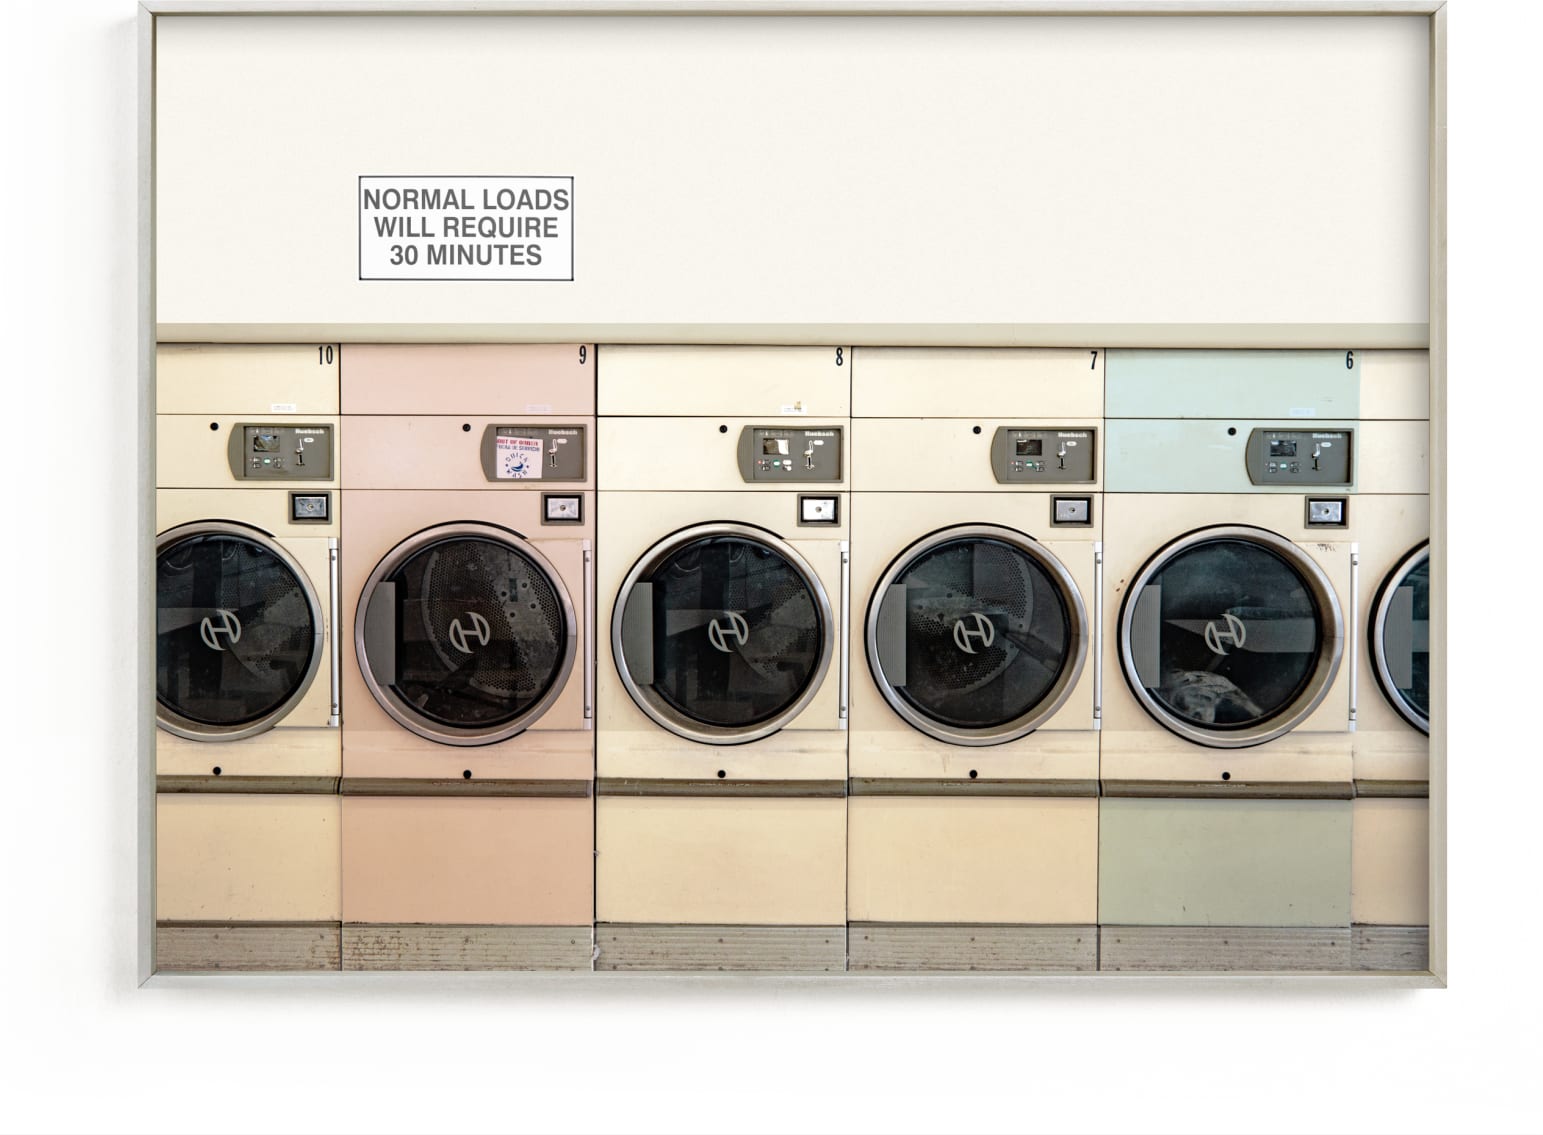 This is a pink art by Maja Cunningham called at the laundromat.